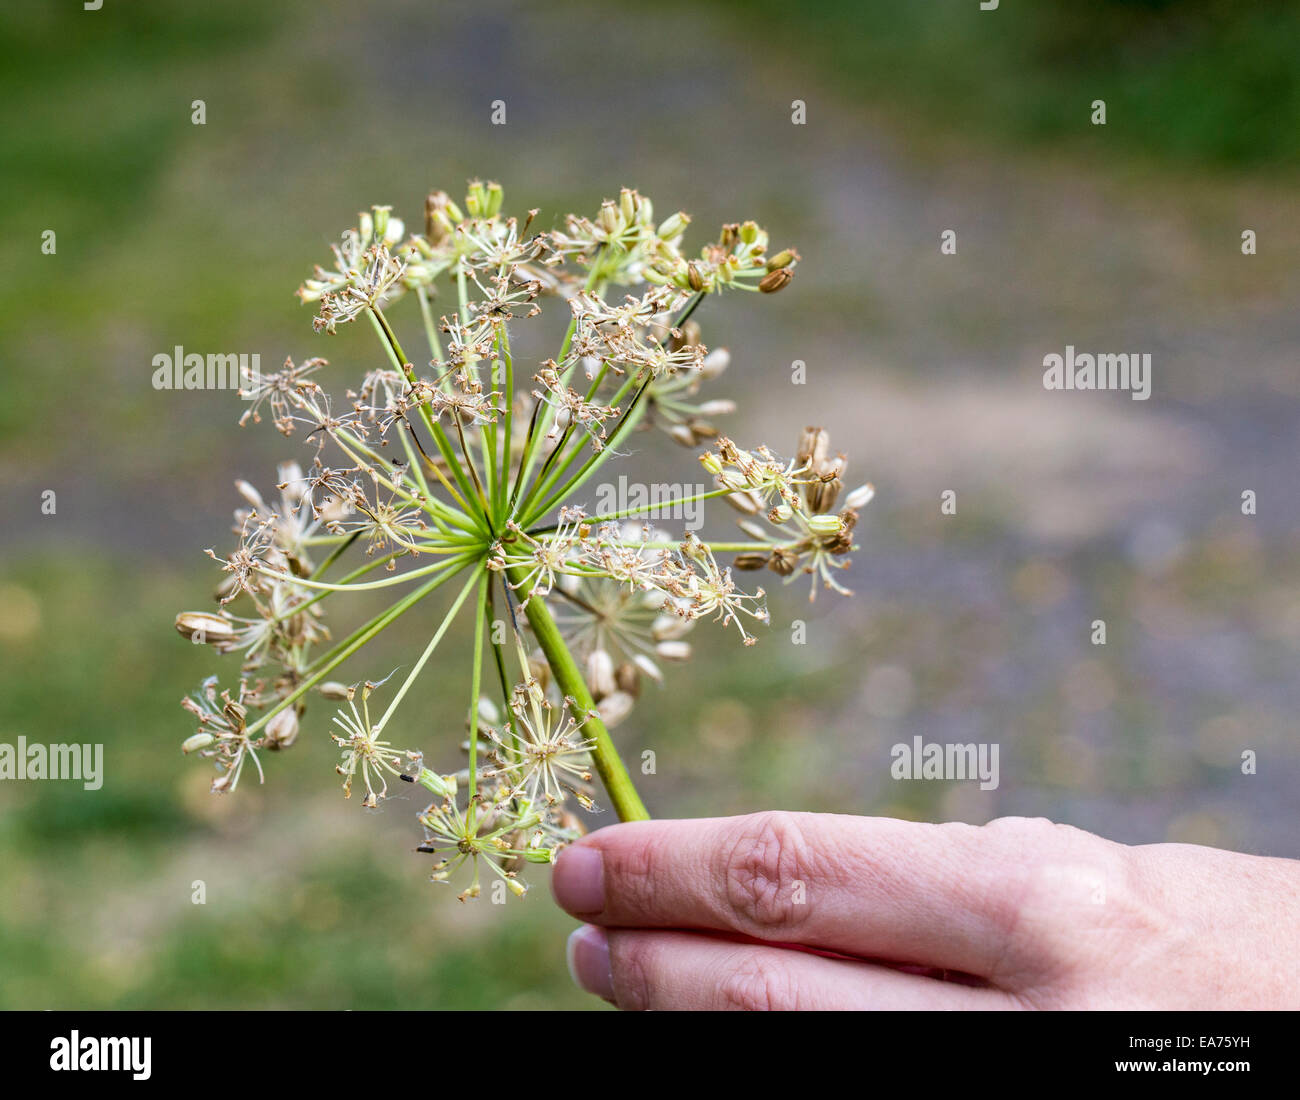 Angelica archangelica, commonly known as garden angelica, Holy Ghost, wild celery, and Norwegian angelica. Stock Photo